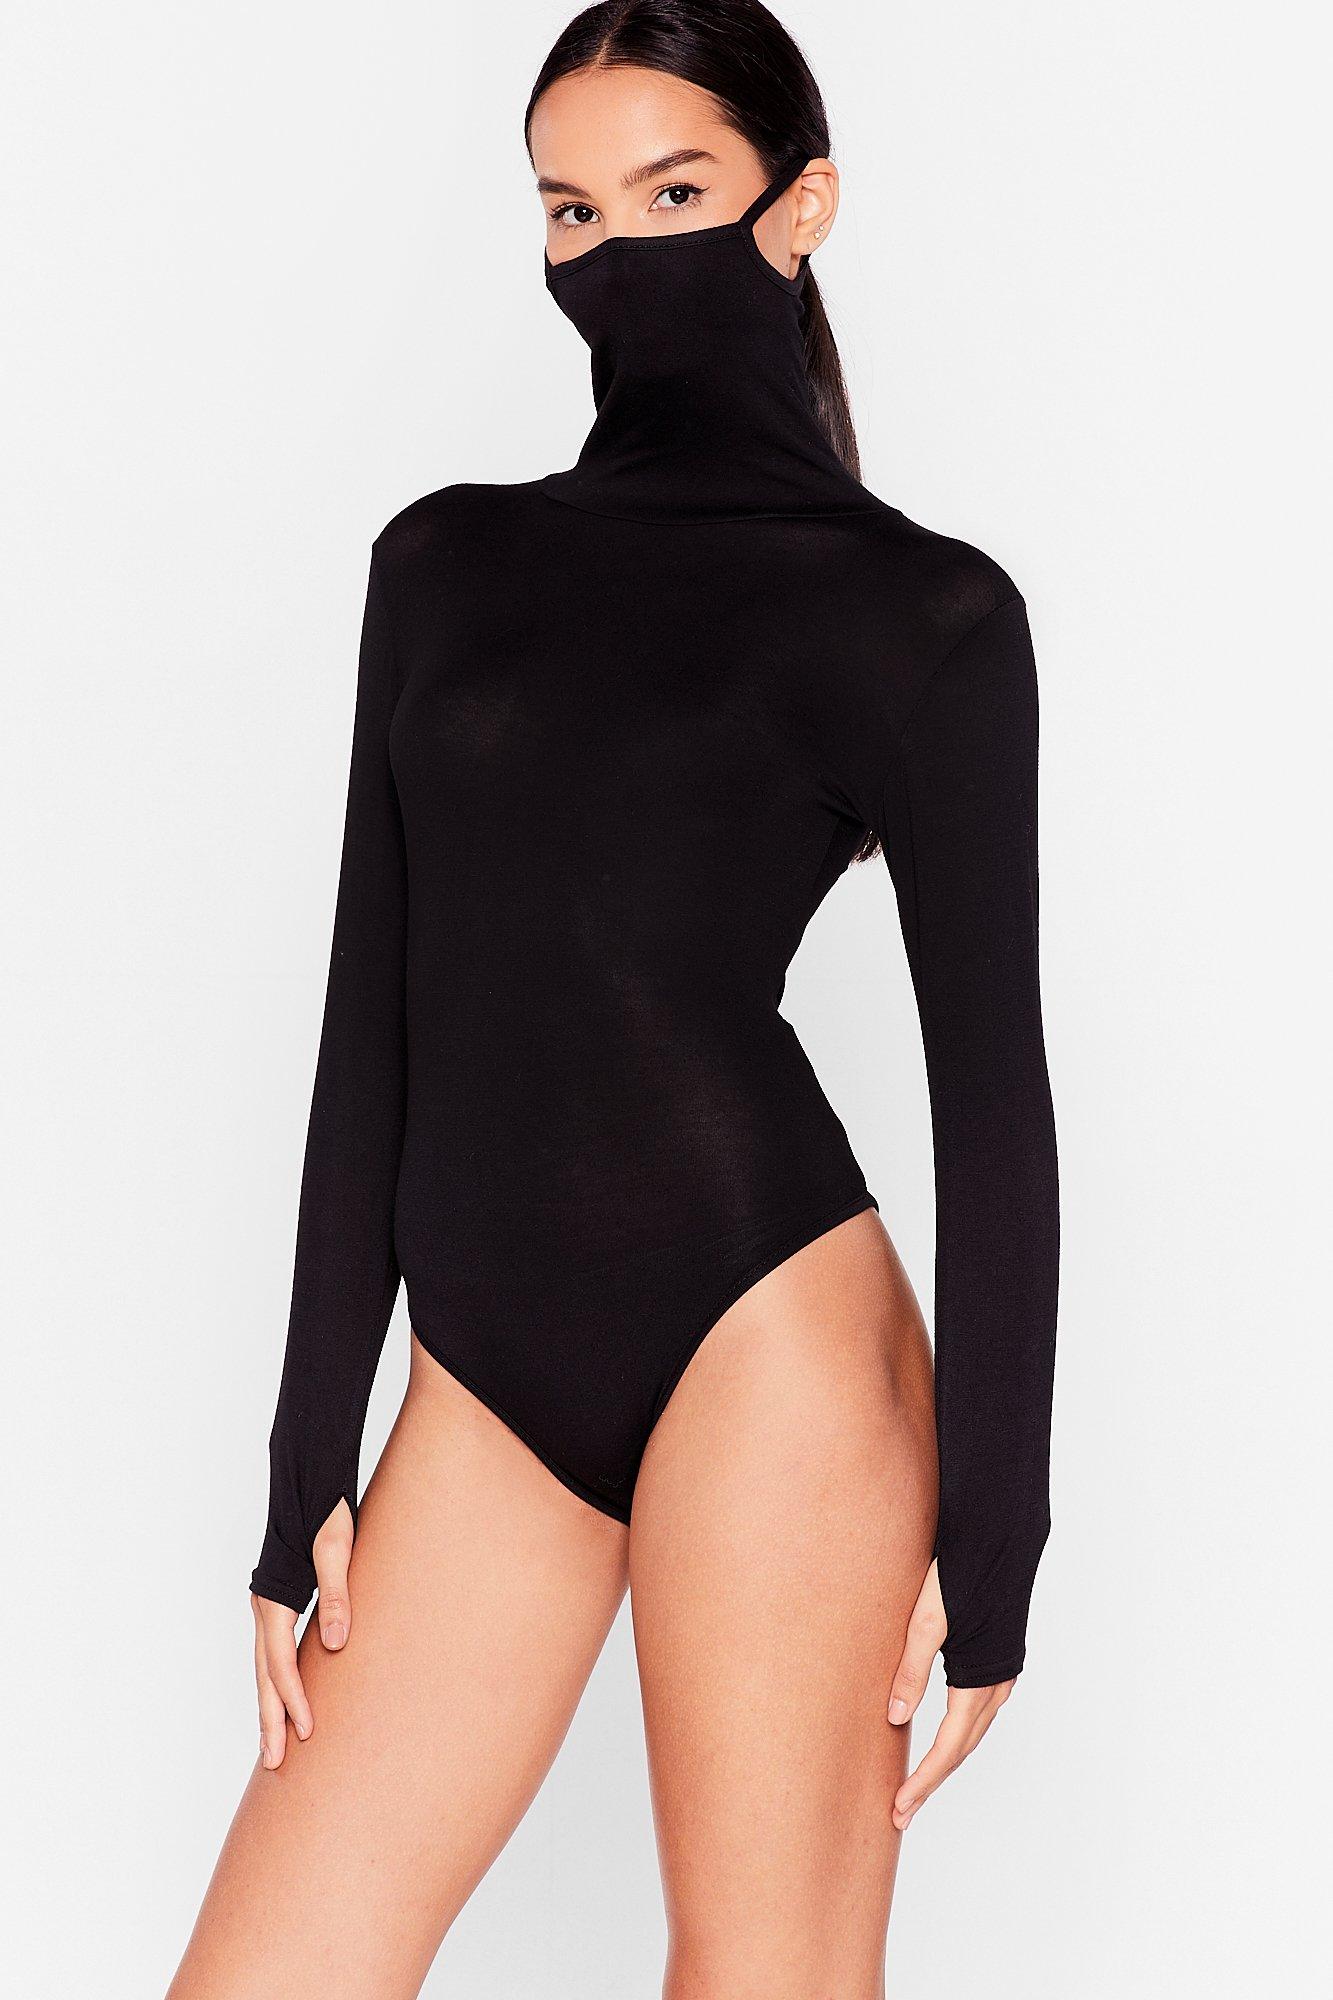 Hey What's Up Face Mask Bodysuit